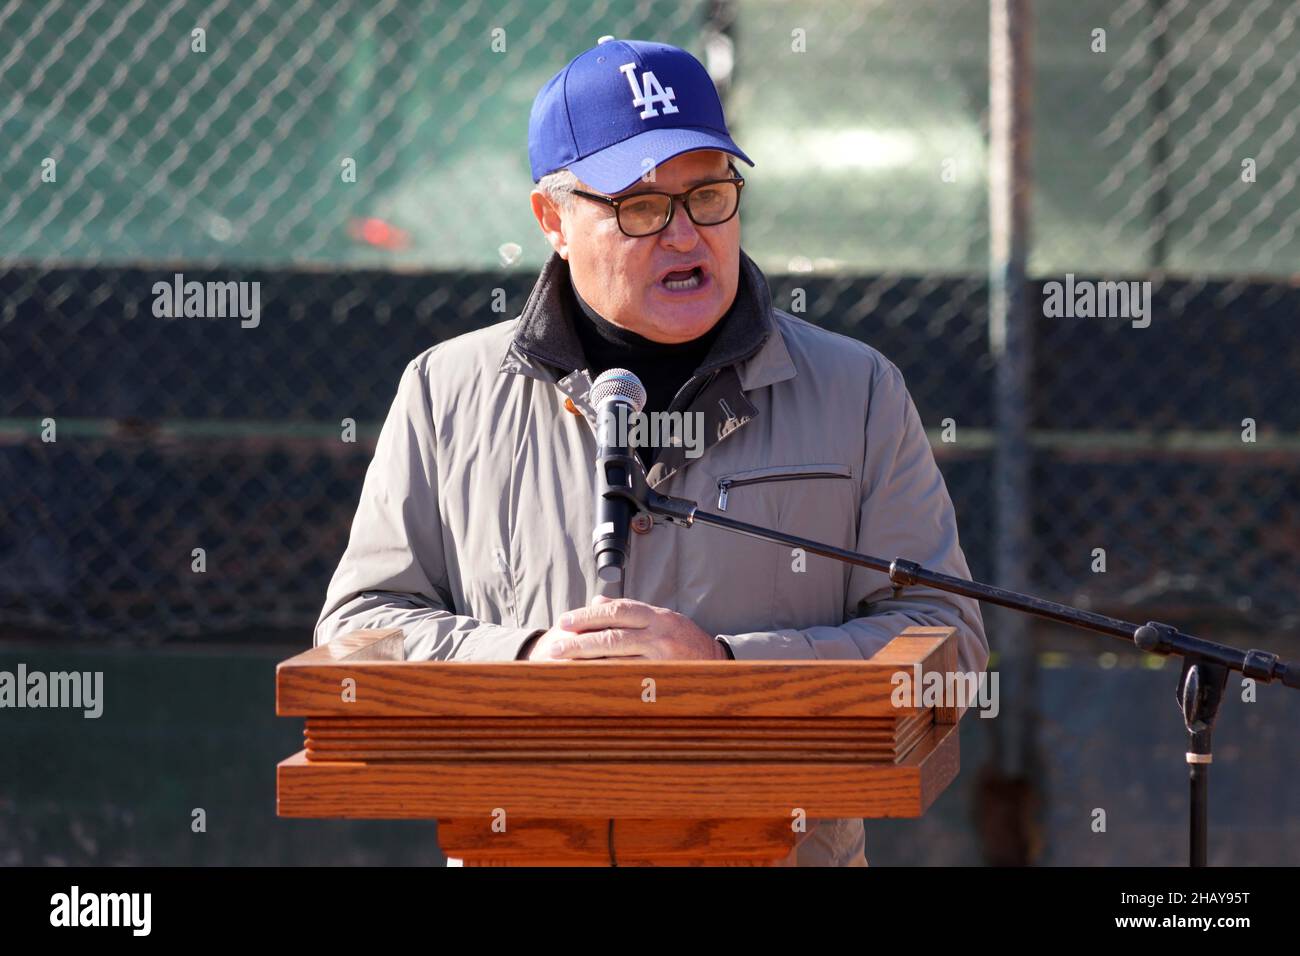 Jorge Jarrin, the son of Los Angeles Dodgers Spanish language broadcaster Jaime Jarrin, speaks during a Dodgers Dreamfield groundbreaking ceremony at Stock Photo